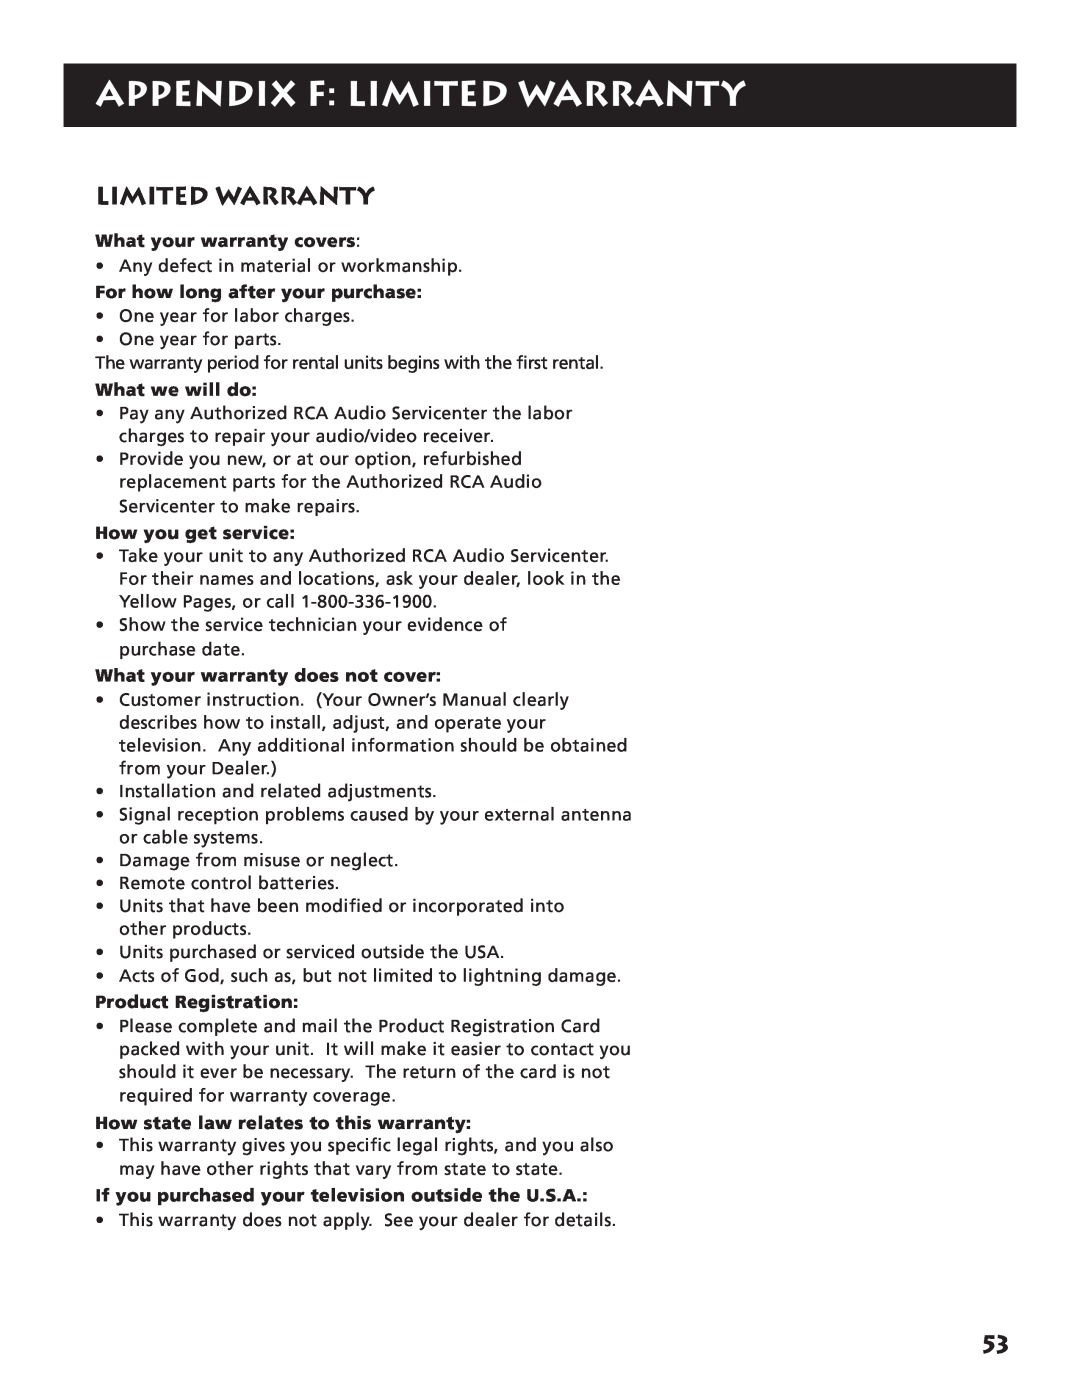 RCA RV3693 manual Appendix F Limited Warranty, What your warranty covers, For how long after your purchase, What we will do 